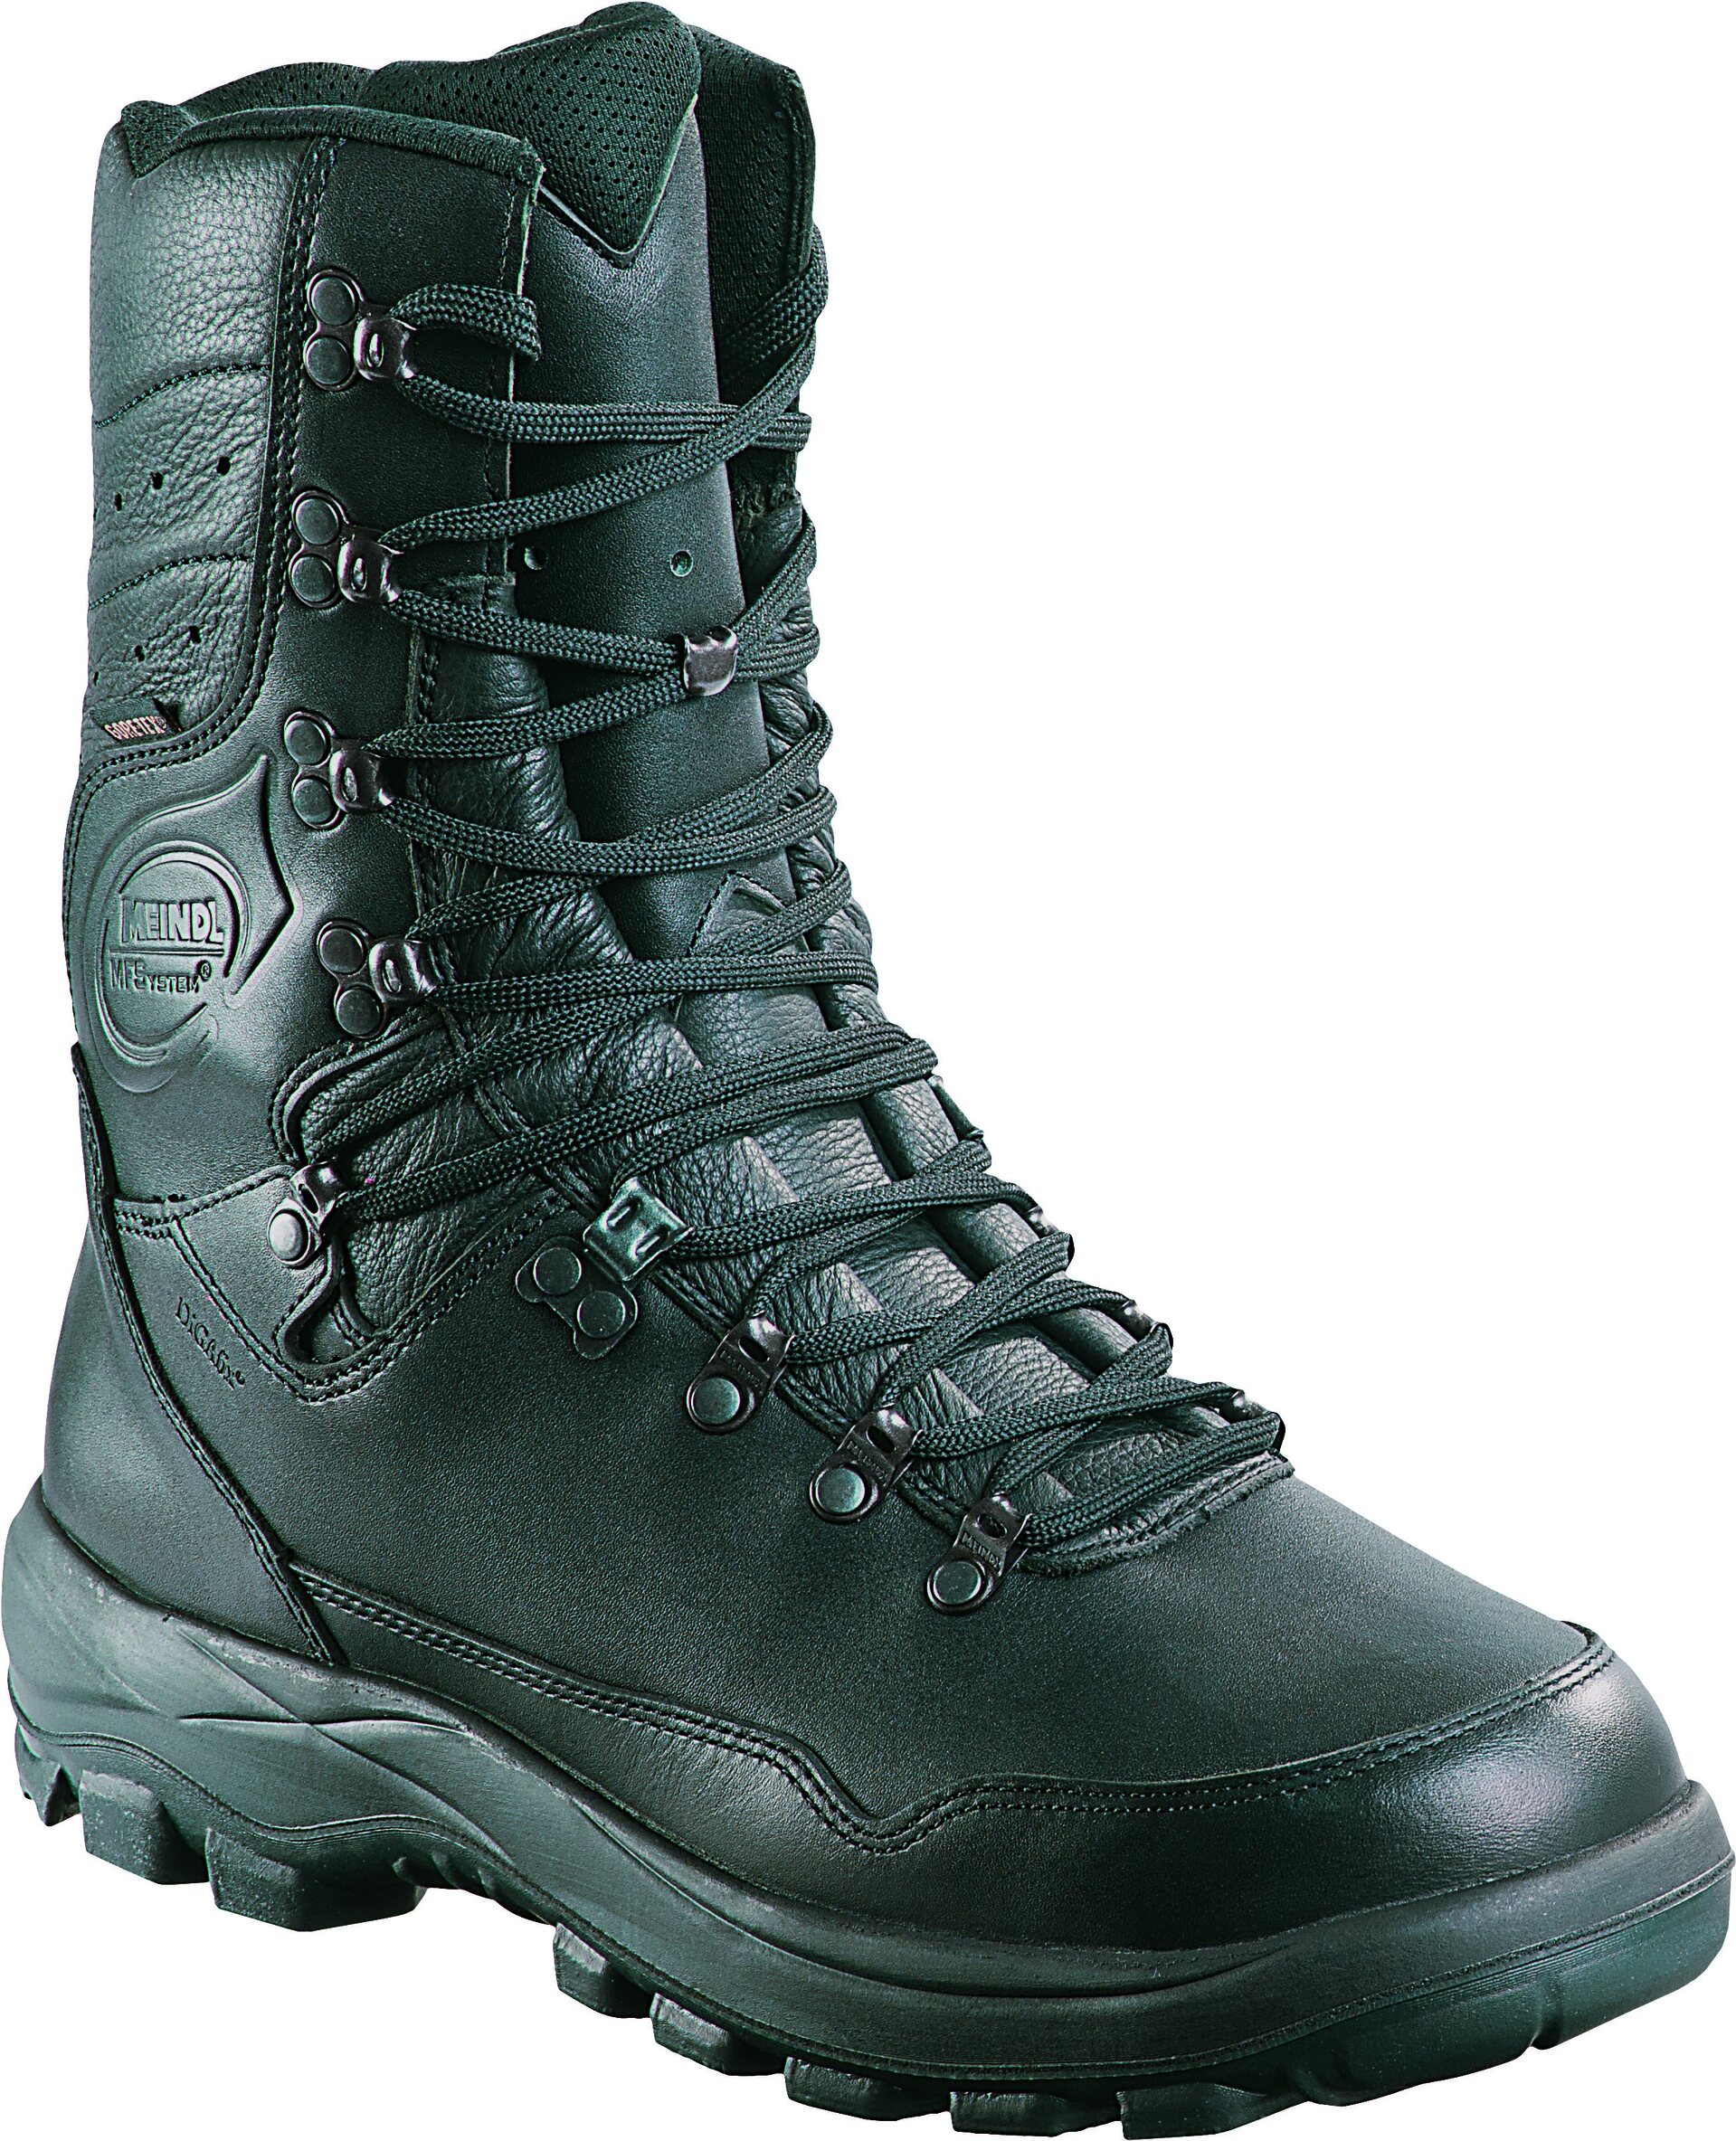 meindl s3 safety boots